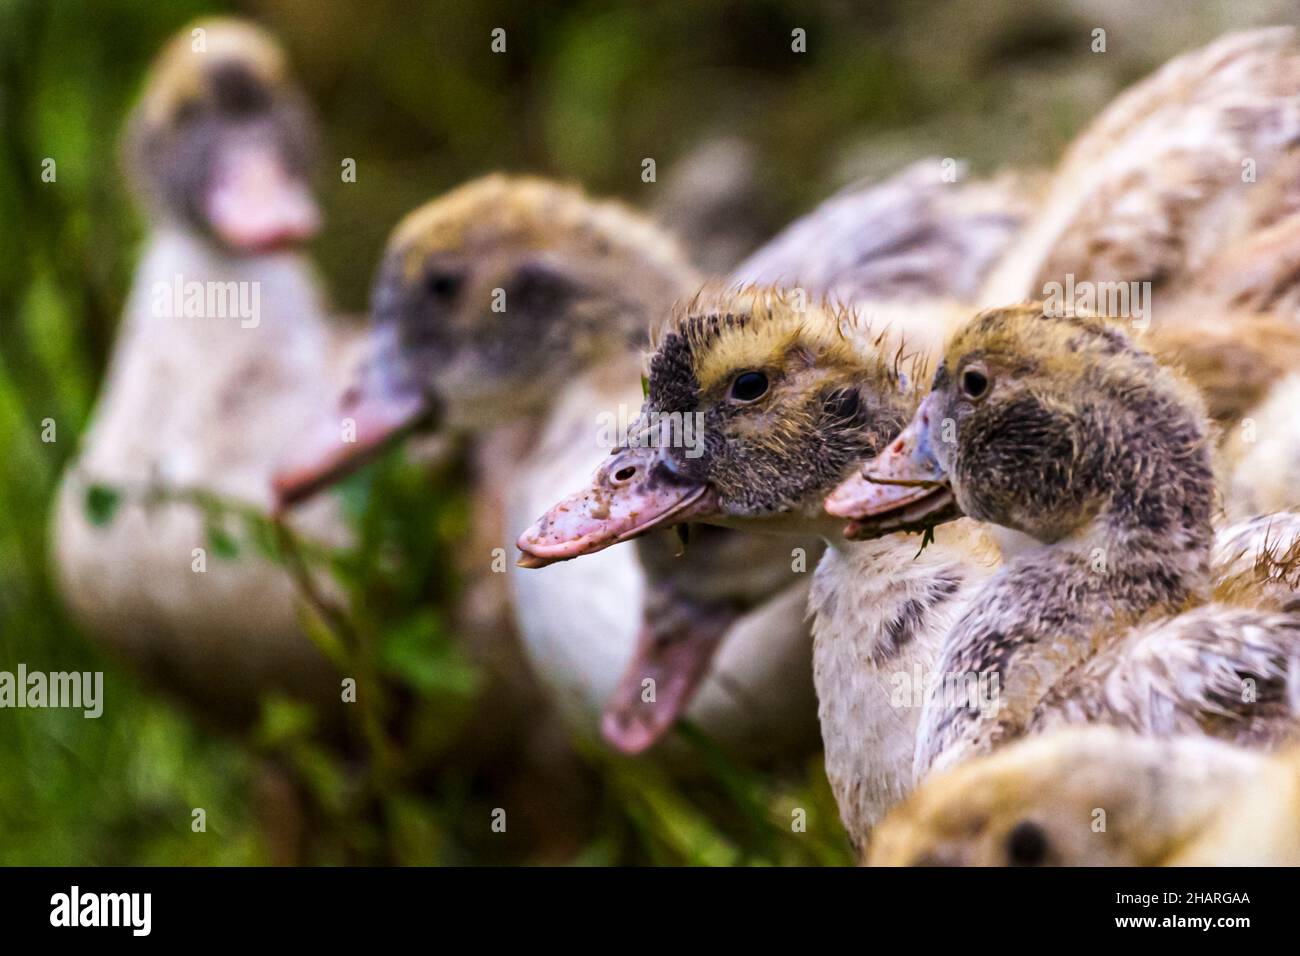 Young ducklings in France Stock Photo